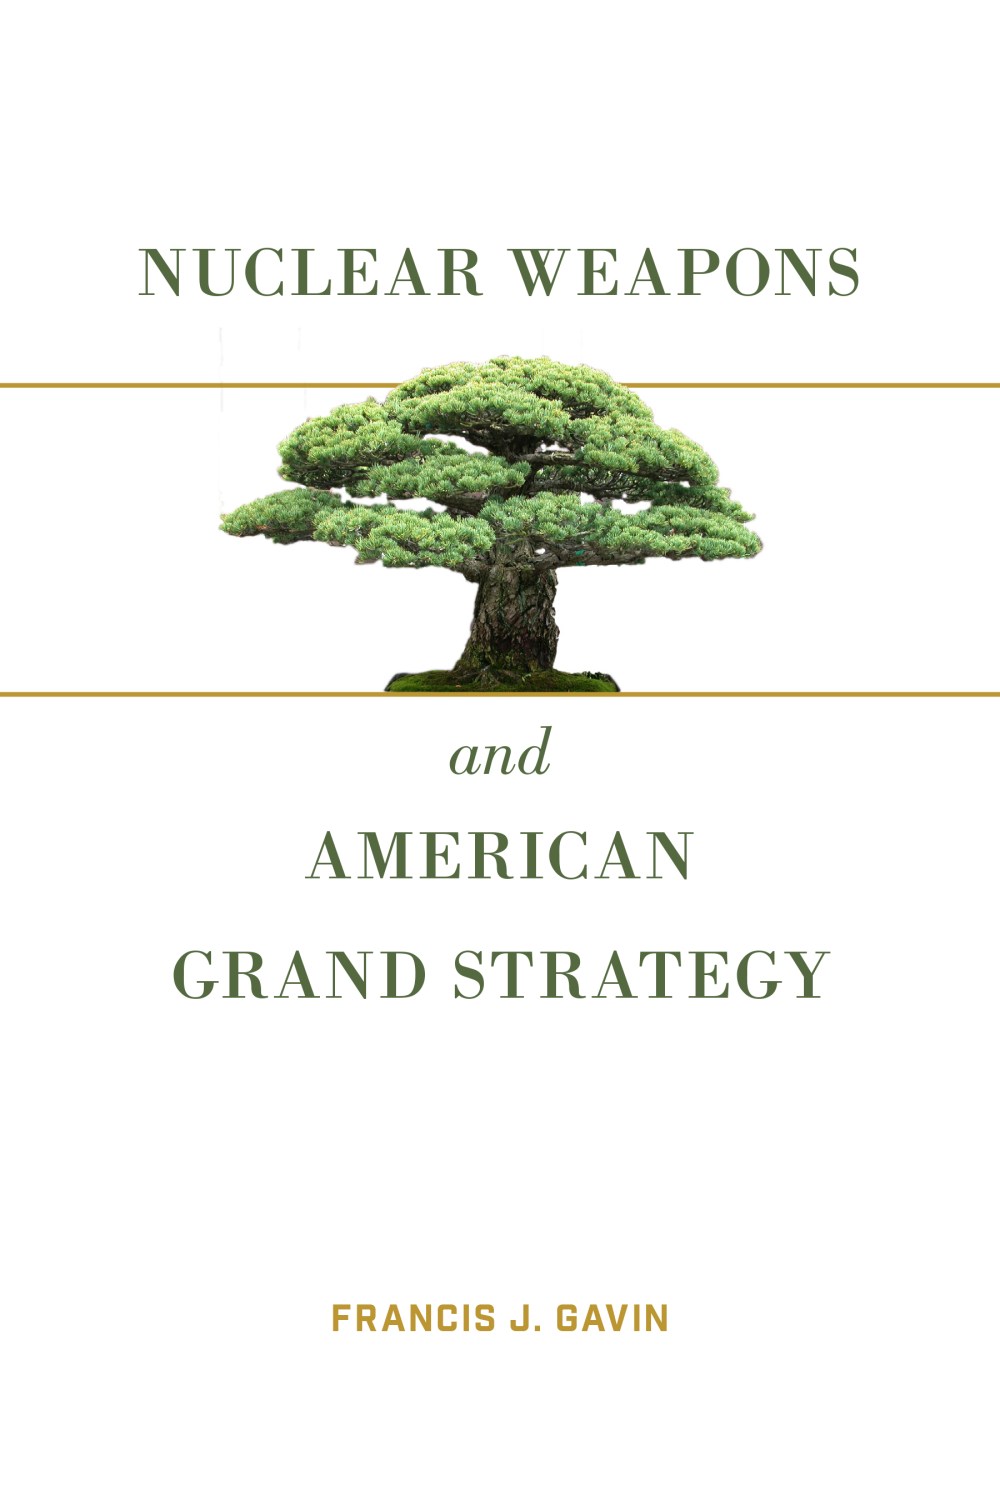 Cvr: Nuclear Weapons and American Grand Strategy